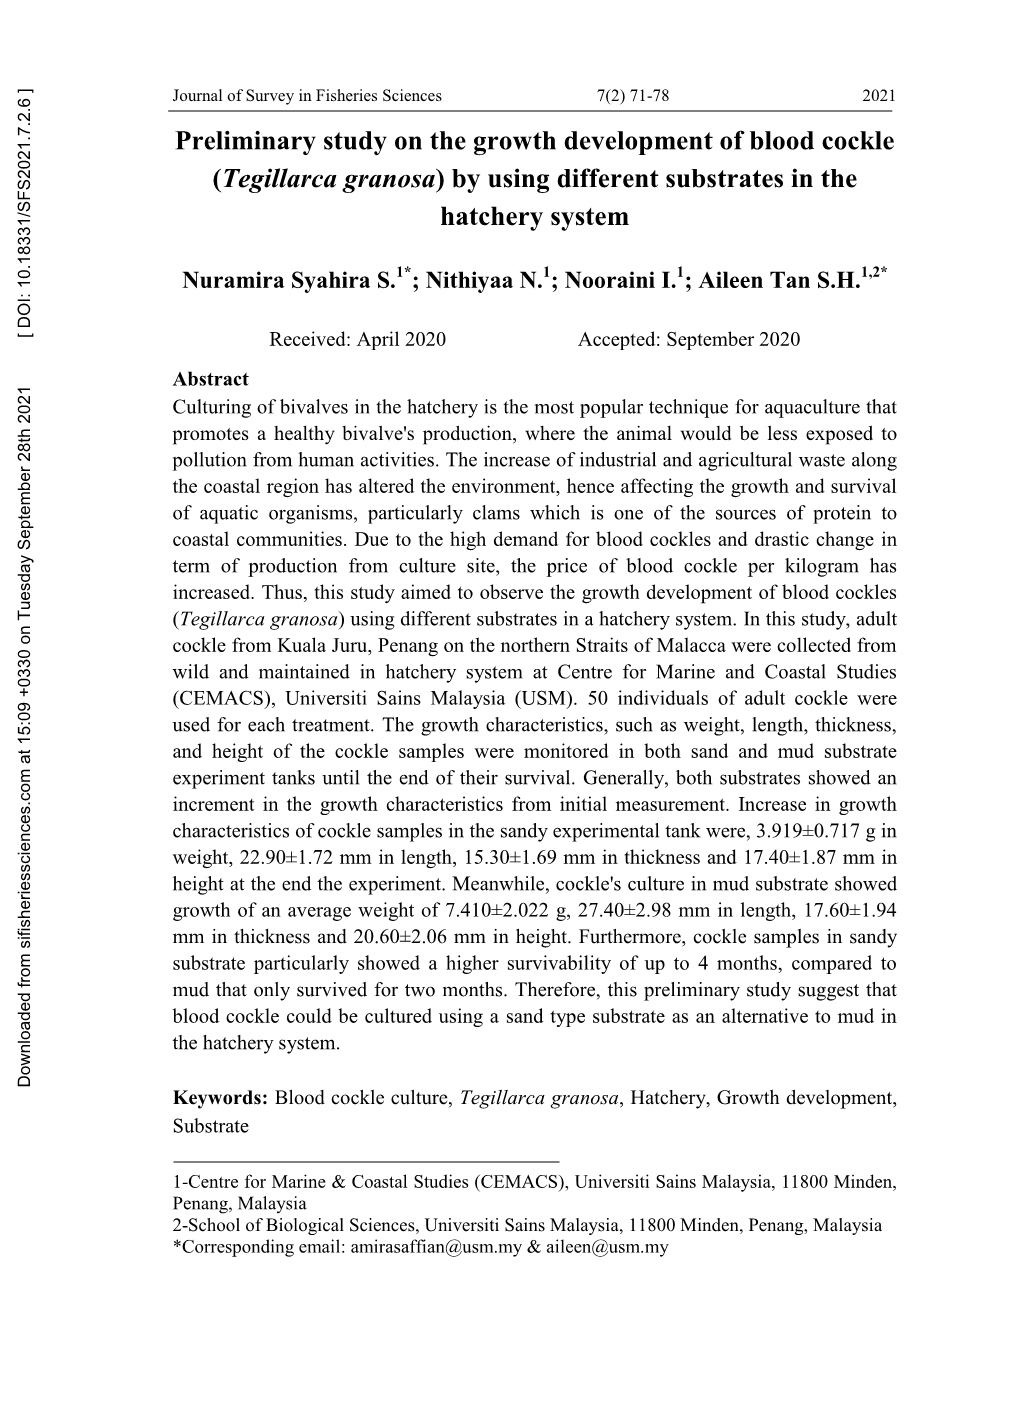 Preliminary Study on the Growth Development of Blood Cockle (Tegillarca Granosa) by Using Different Substrates in the Hatchery System